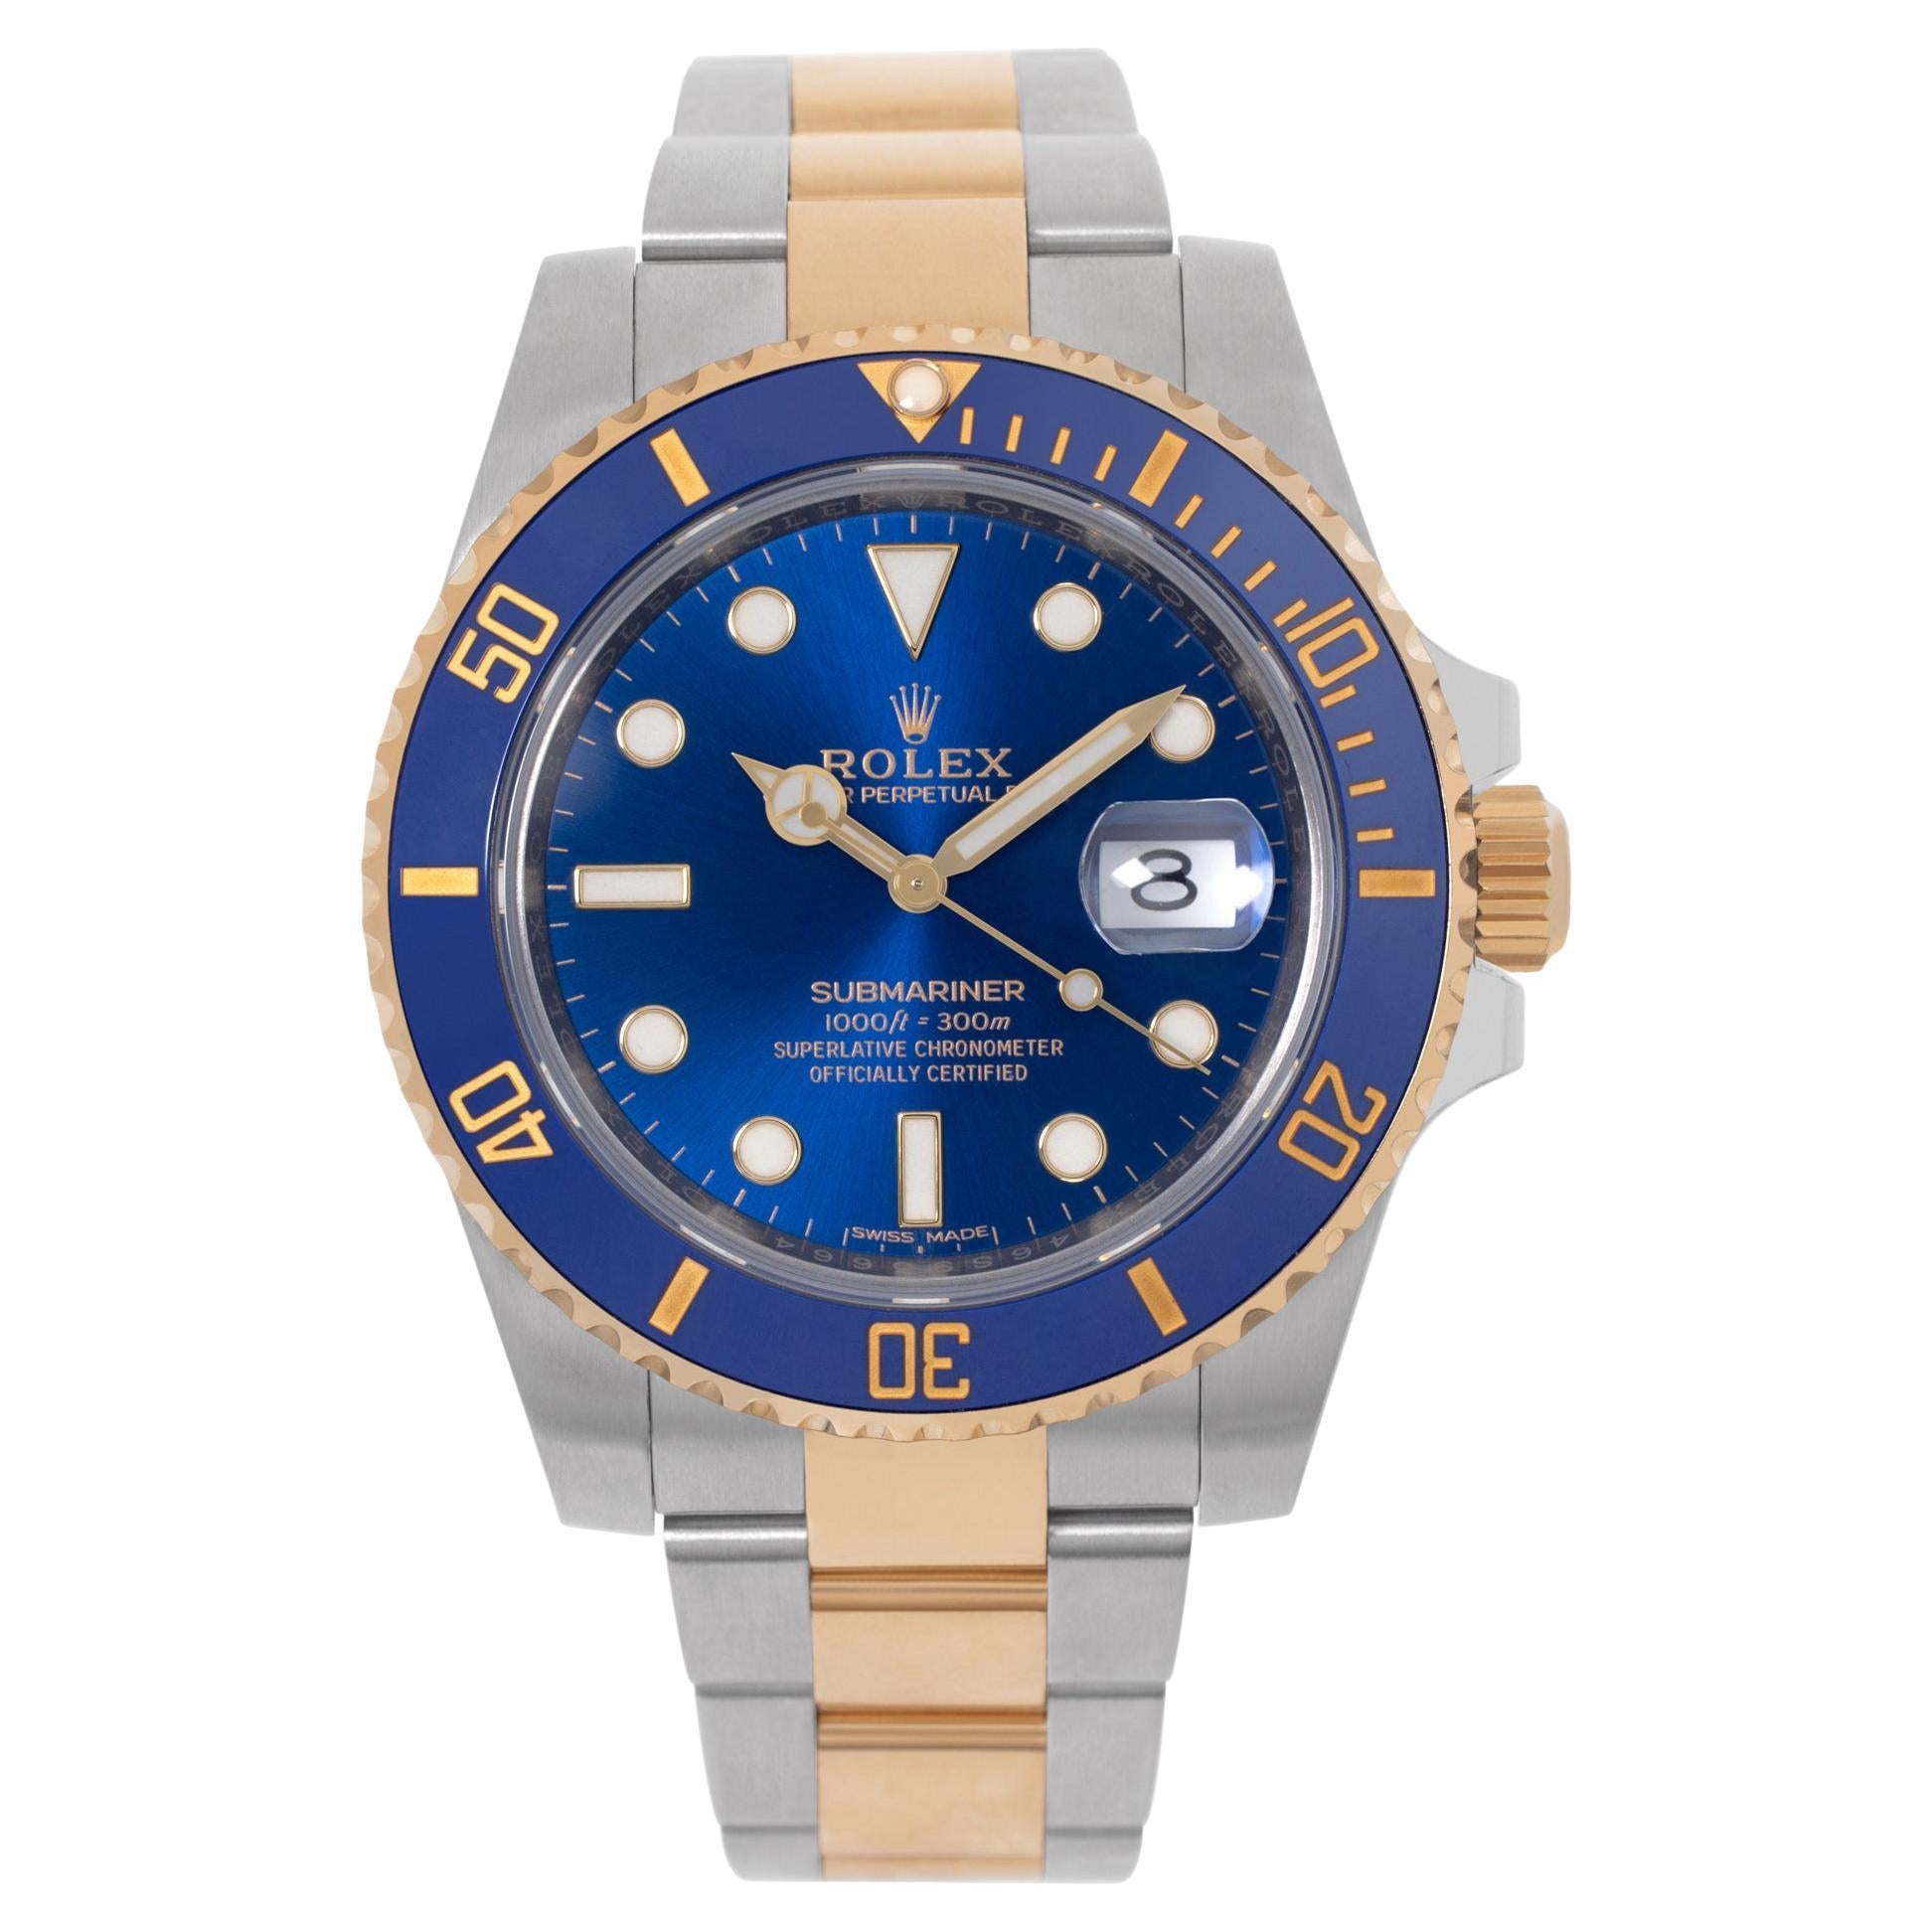 Rolex Submariner 116613 Automatic Watch Stainless Steel Blue Dial